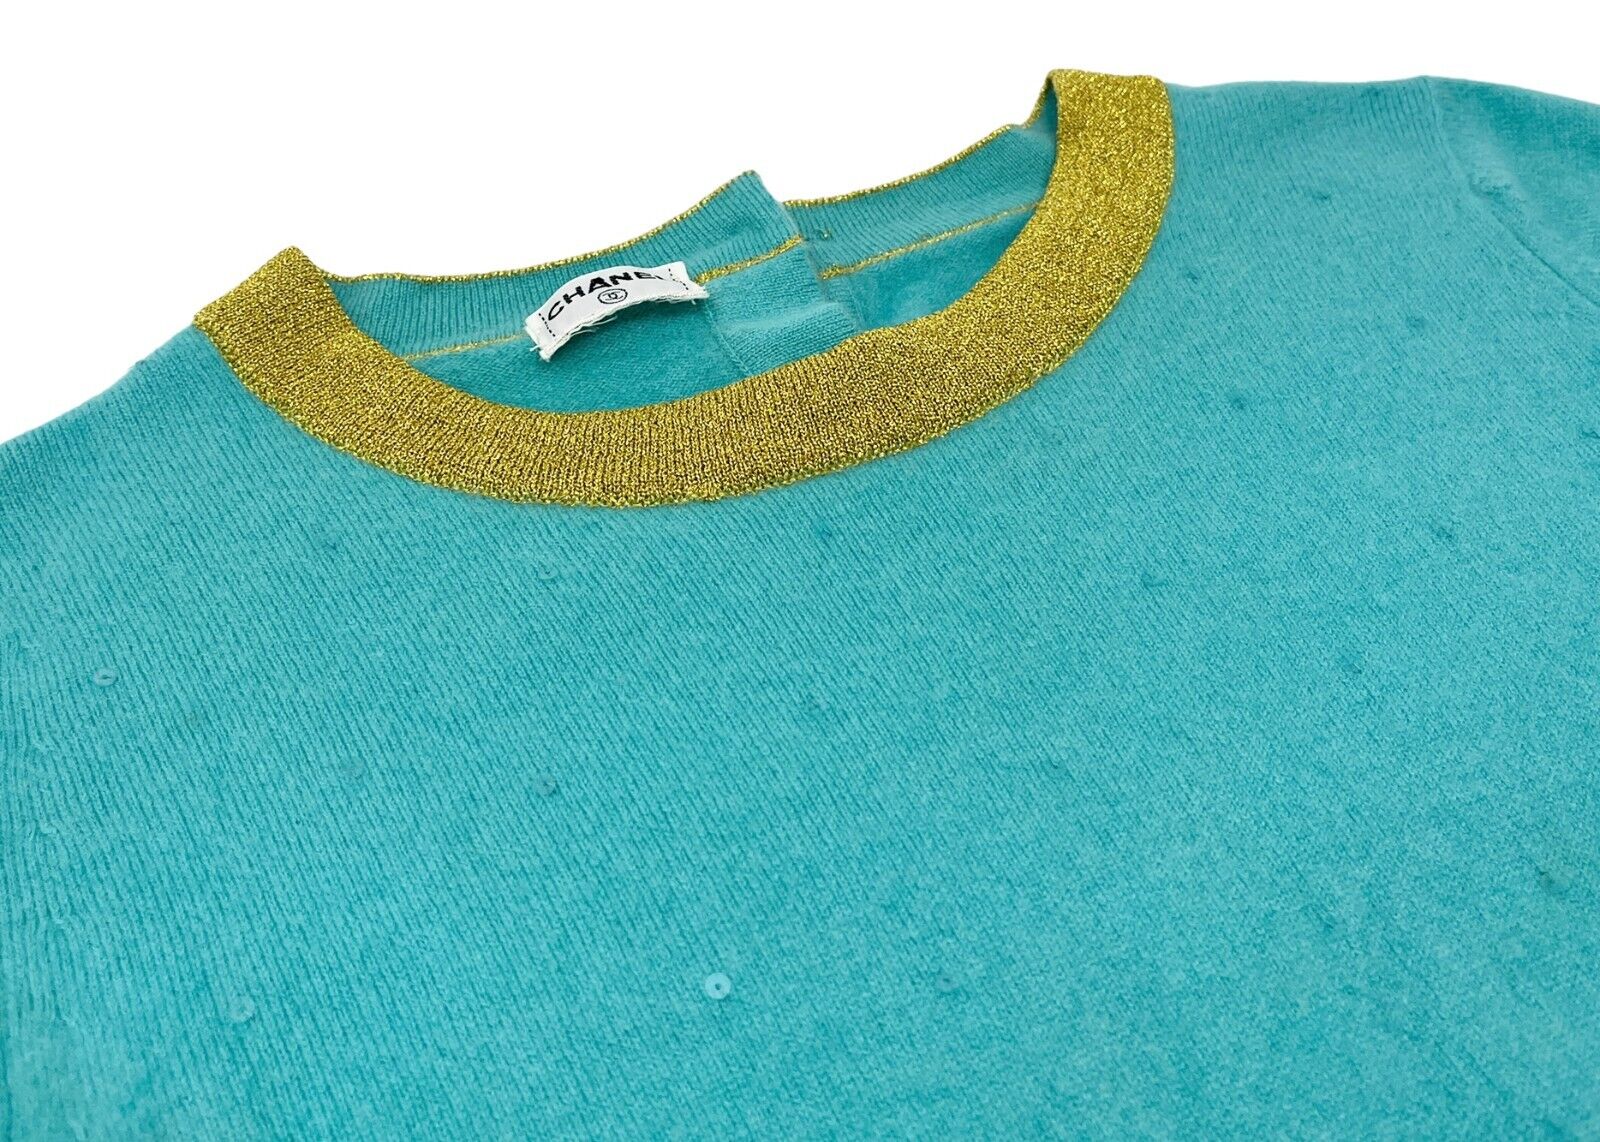 CHANEL Vintage 96A CC Logo Sweater Top Cropped Top Glitter Sequins Blue RankAB